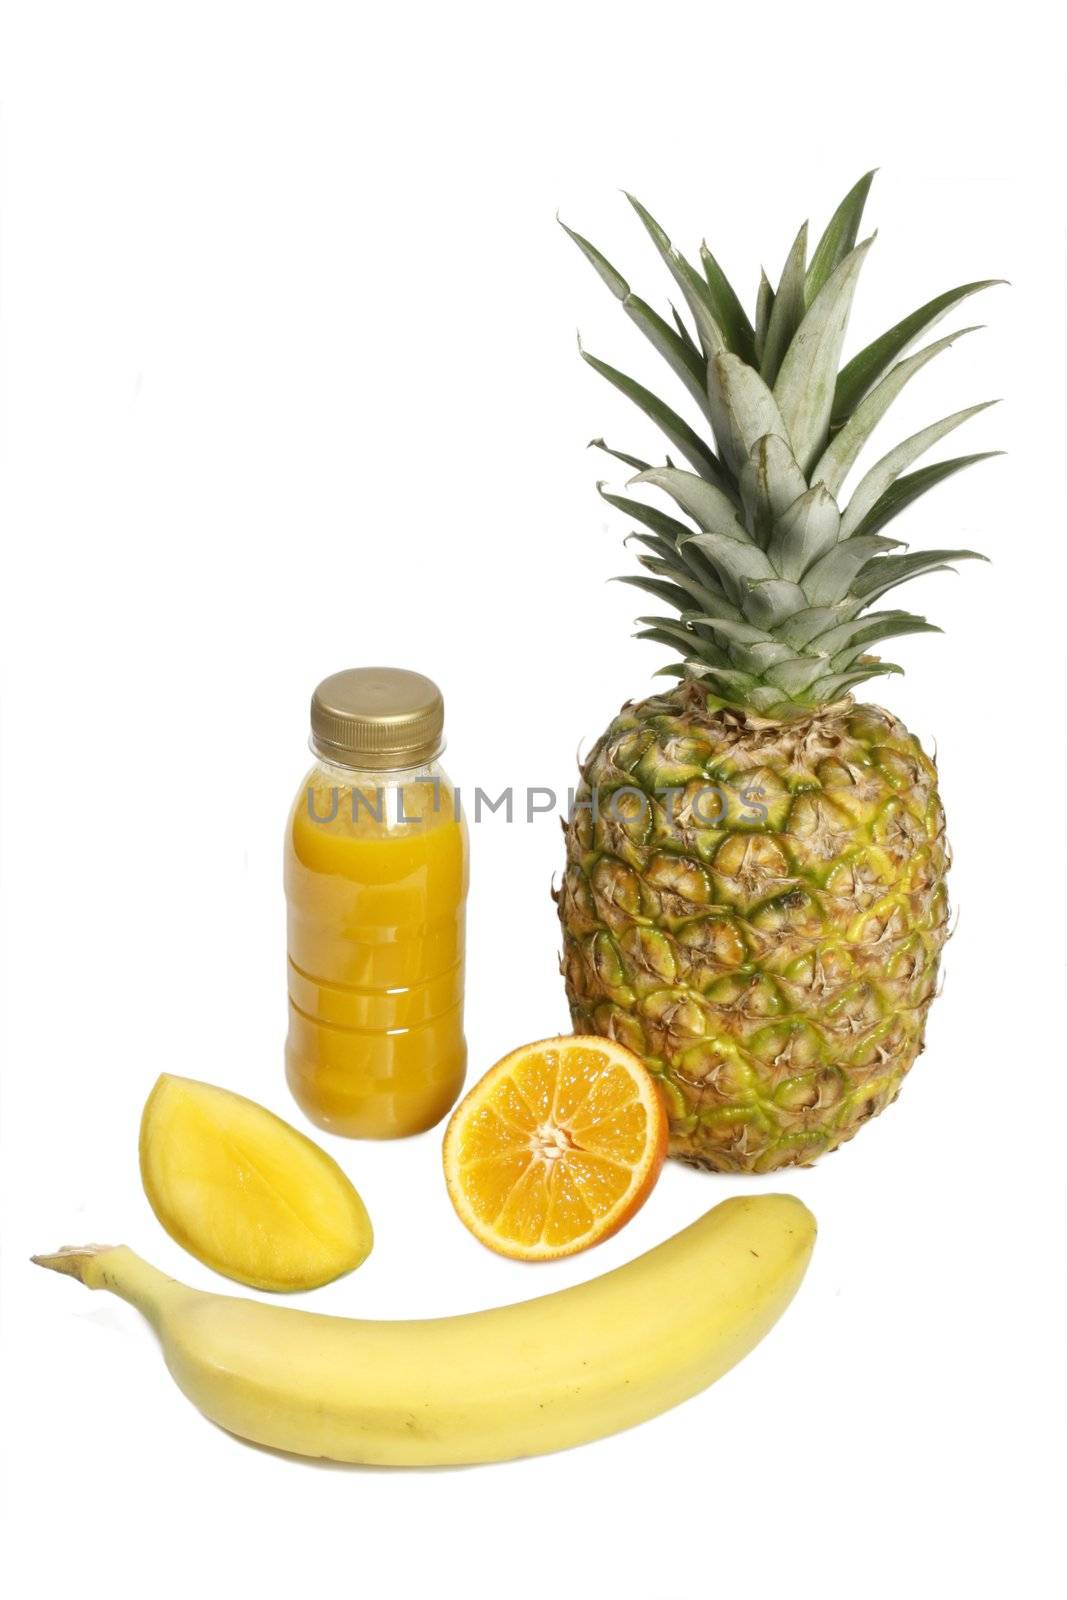 Smoothie with tropical fruits - isolated on white background